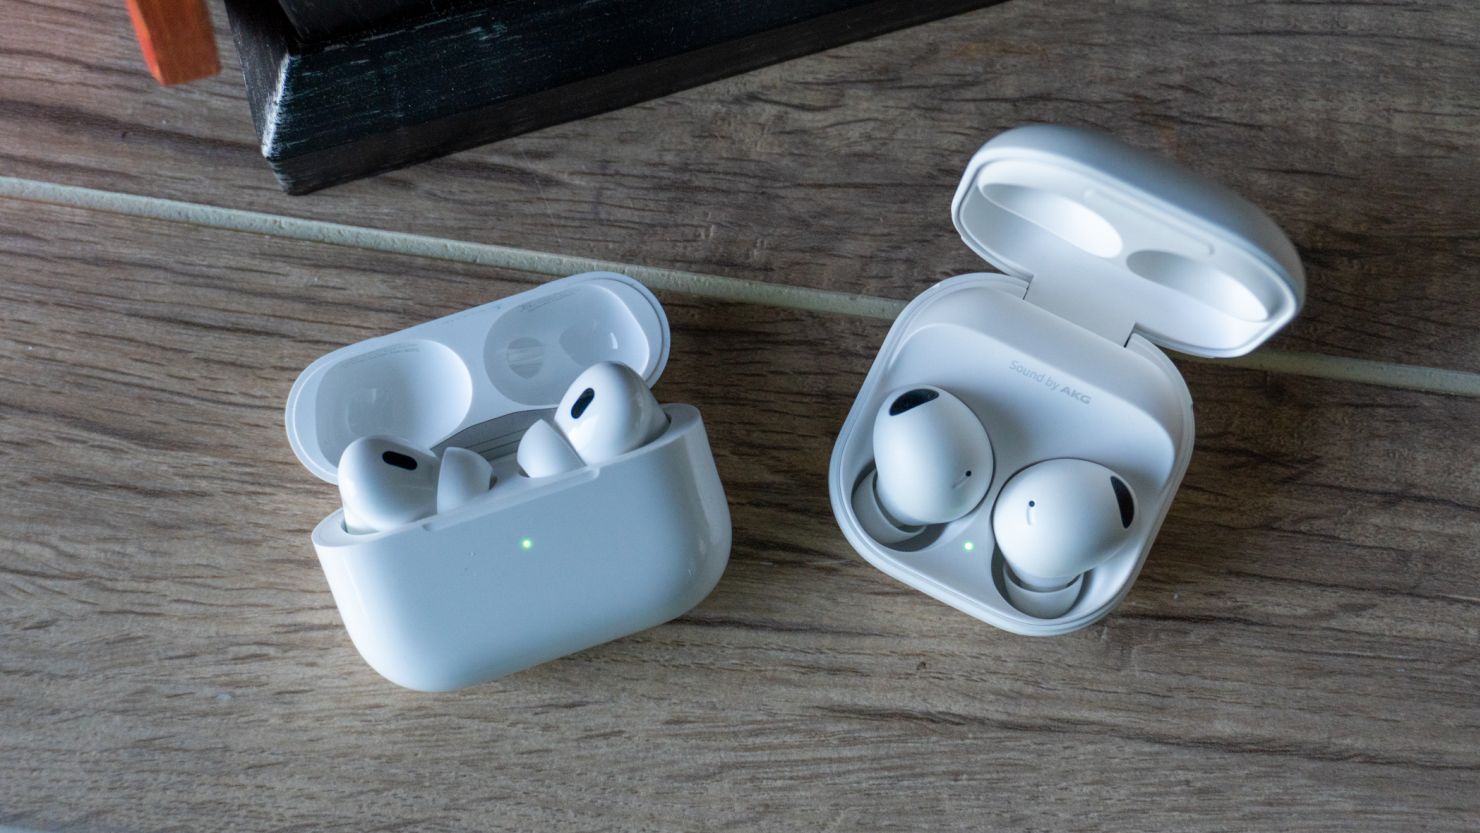 Samsung Galaxy Buds 2 vs Apple AirPods: Which earbud offers the